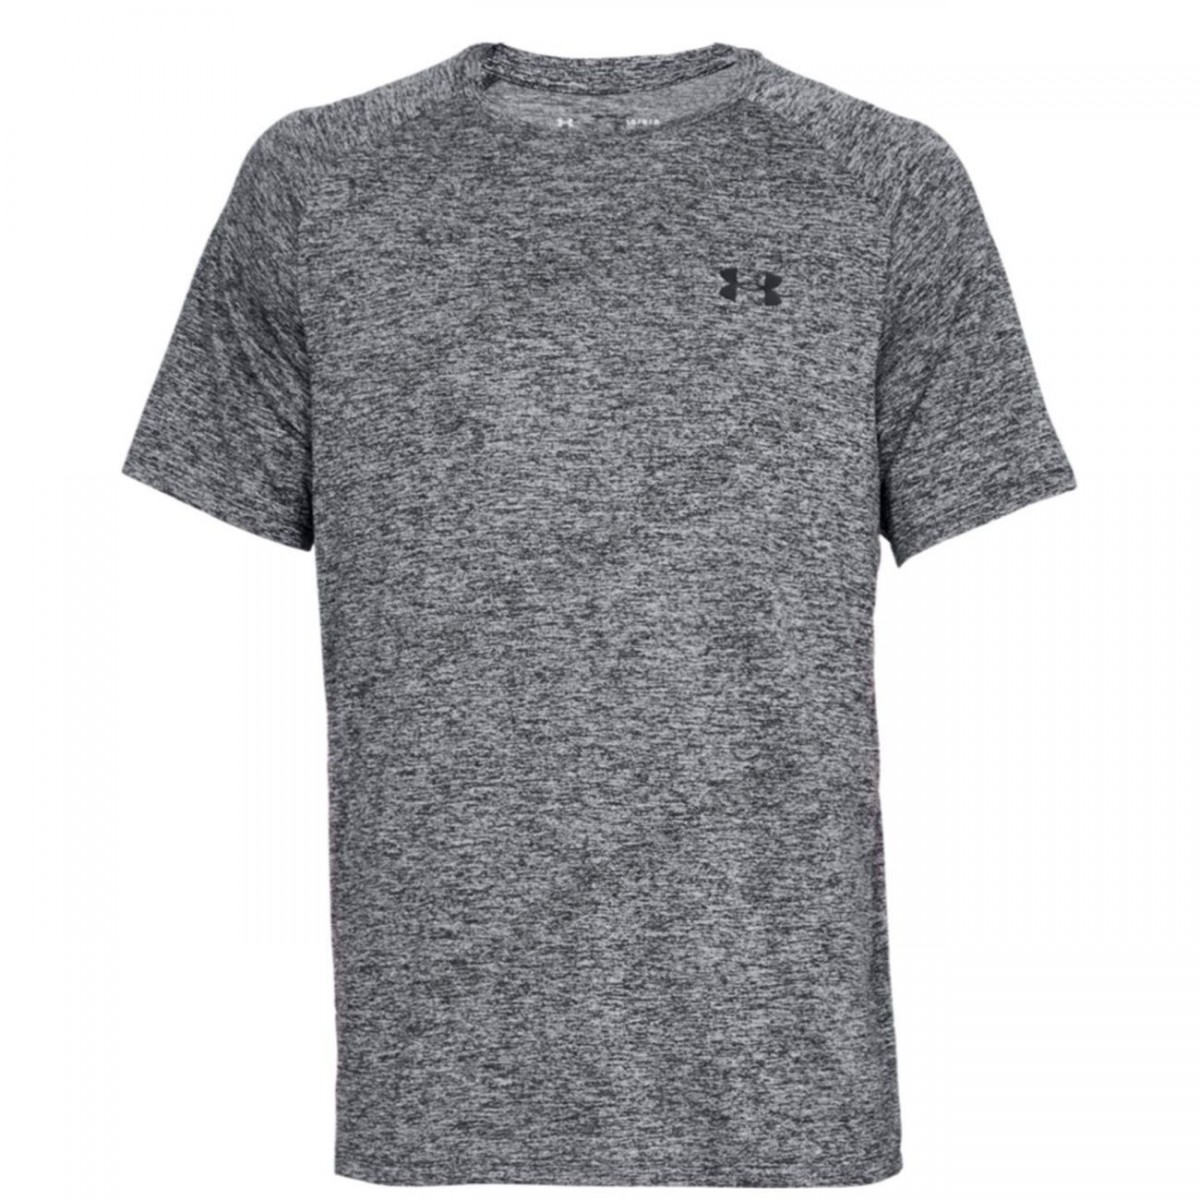 Under Armour/running adulte UNDER ARMOUR Maillot running manches courtes - Homme - UA005 - gris √ Nouveau style √ Soldes - -3